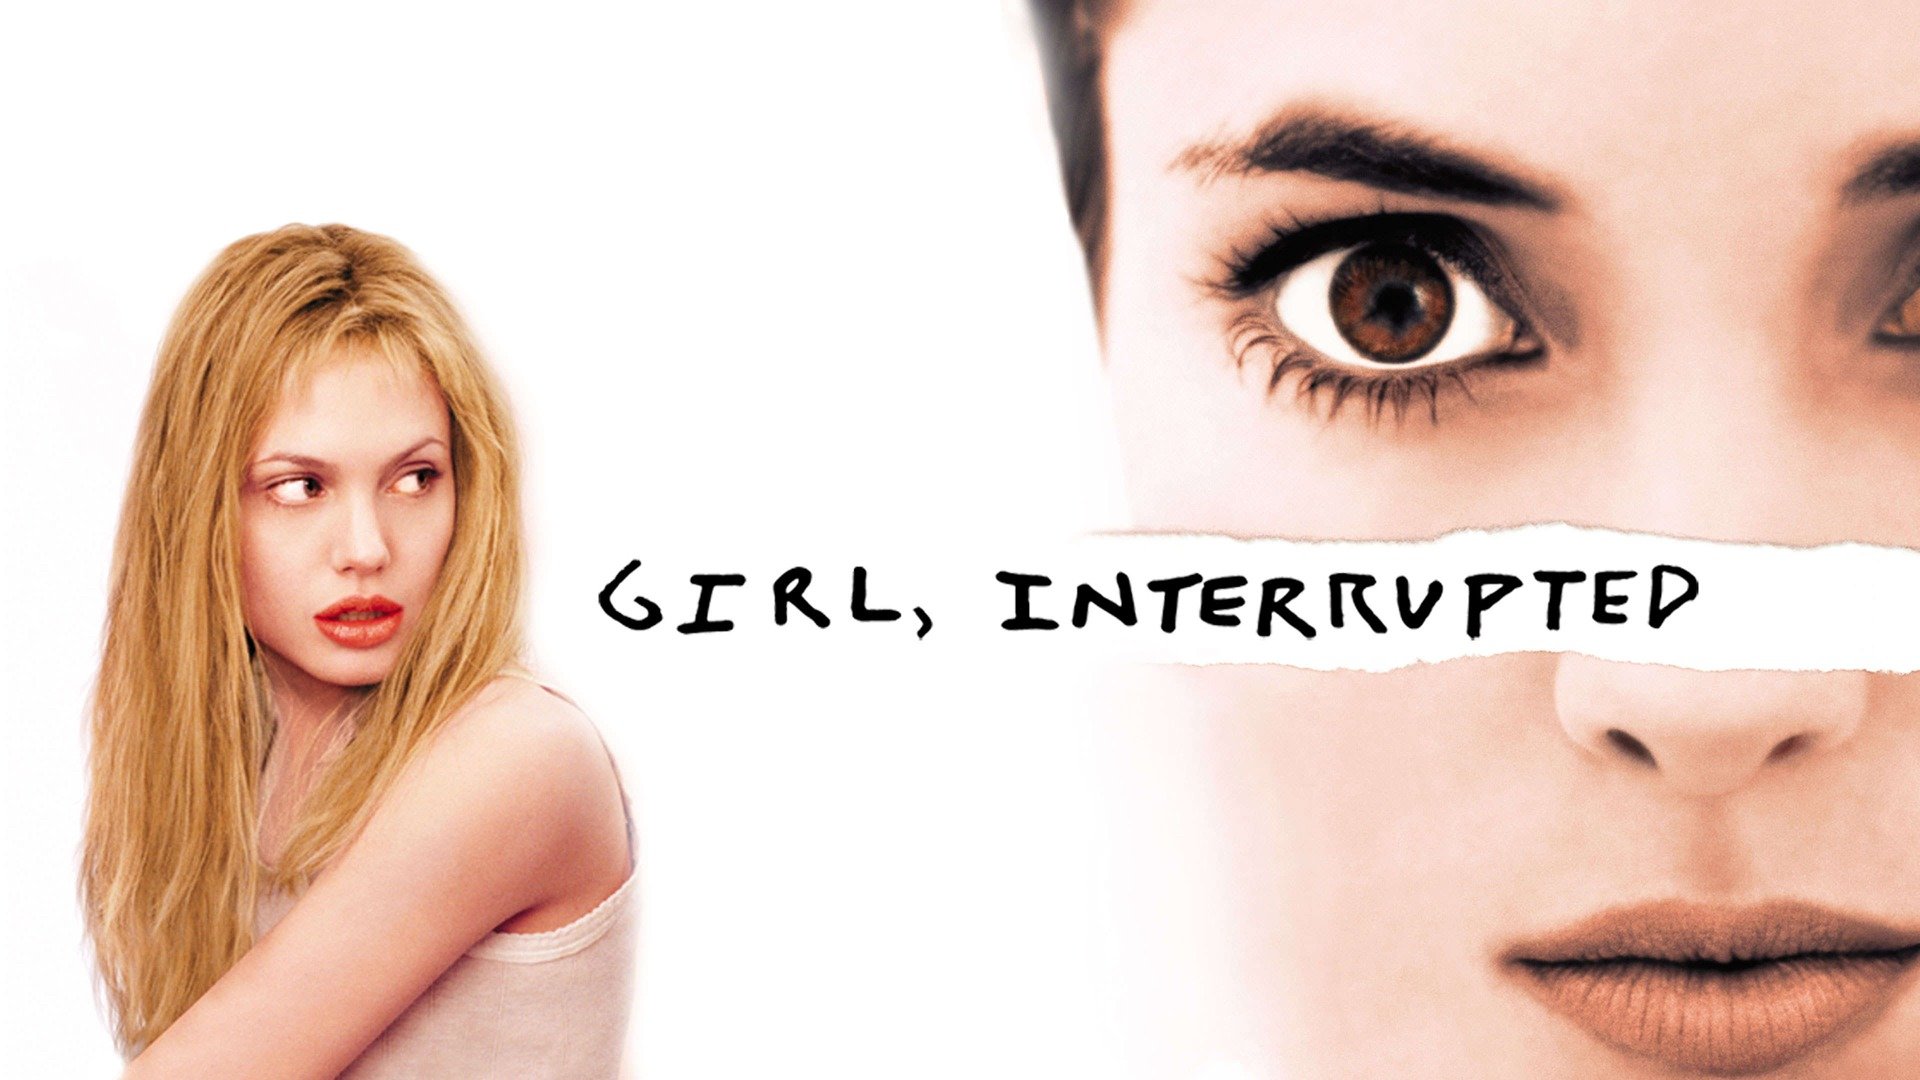 Girl Interrupted Trailer 1 Trailers And Videos Rotten Tomatoes 6477